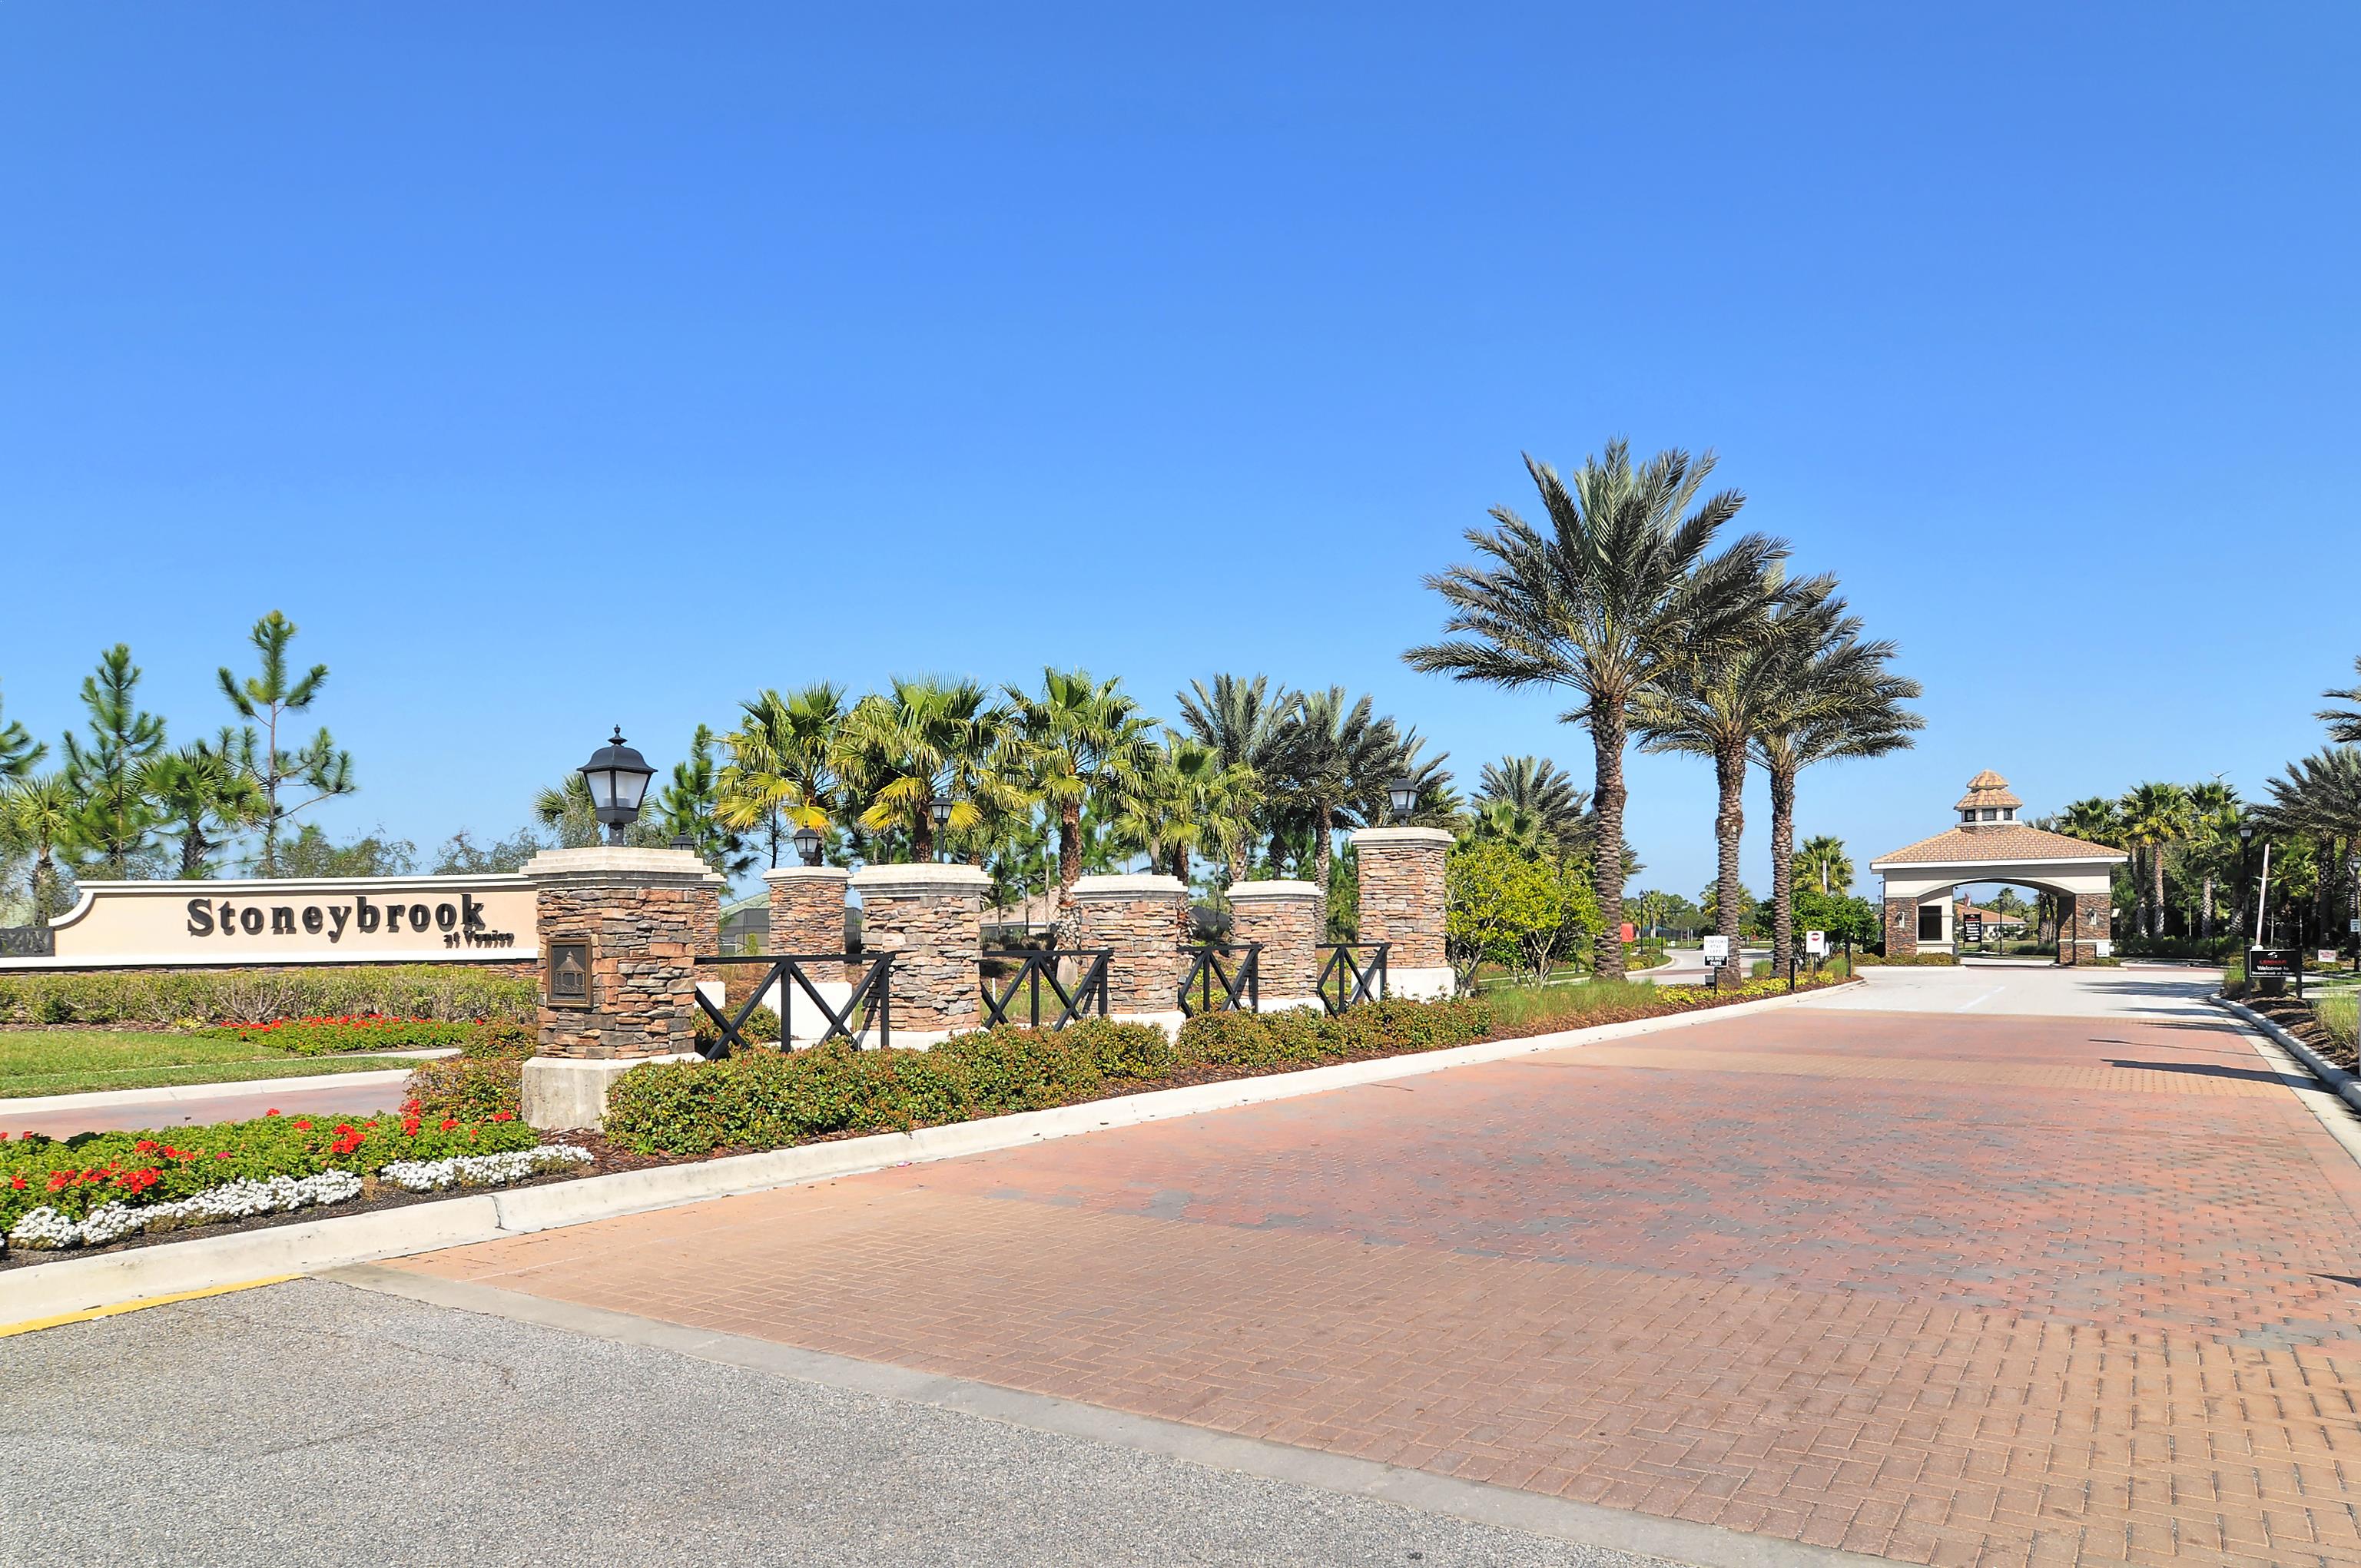 Stoneybrook at Venice : Homes for Sale in a Gated Community